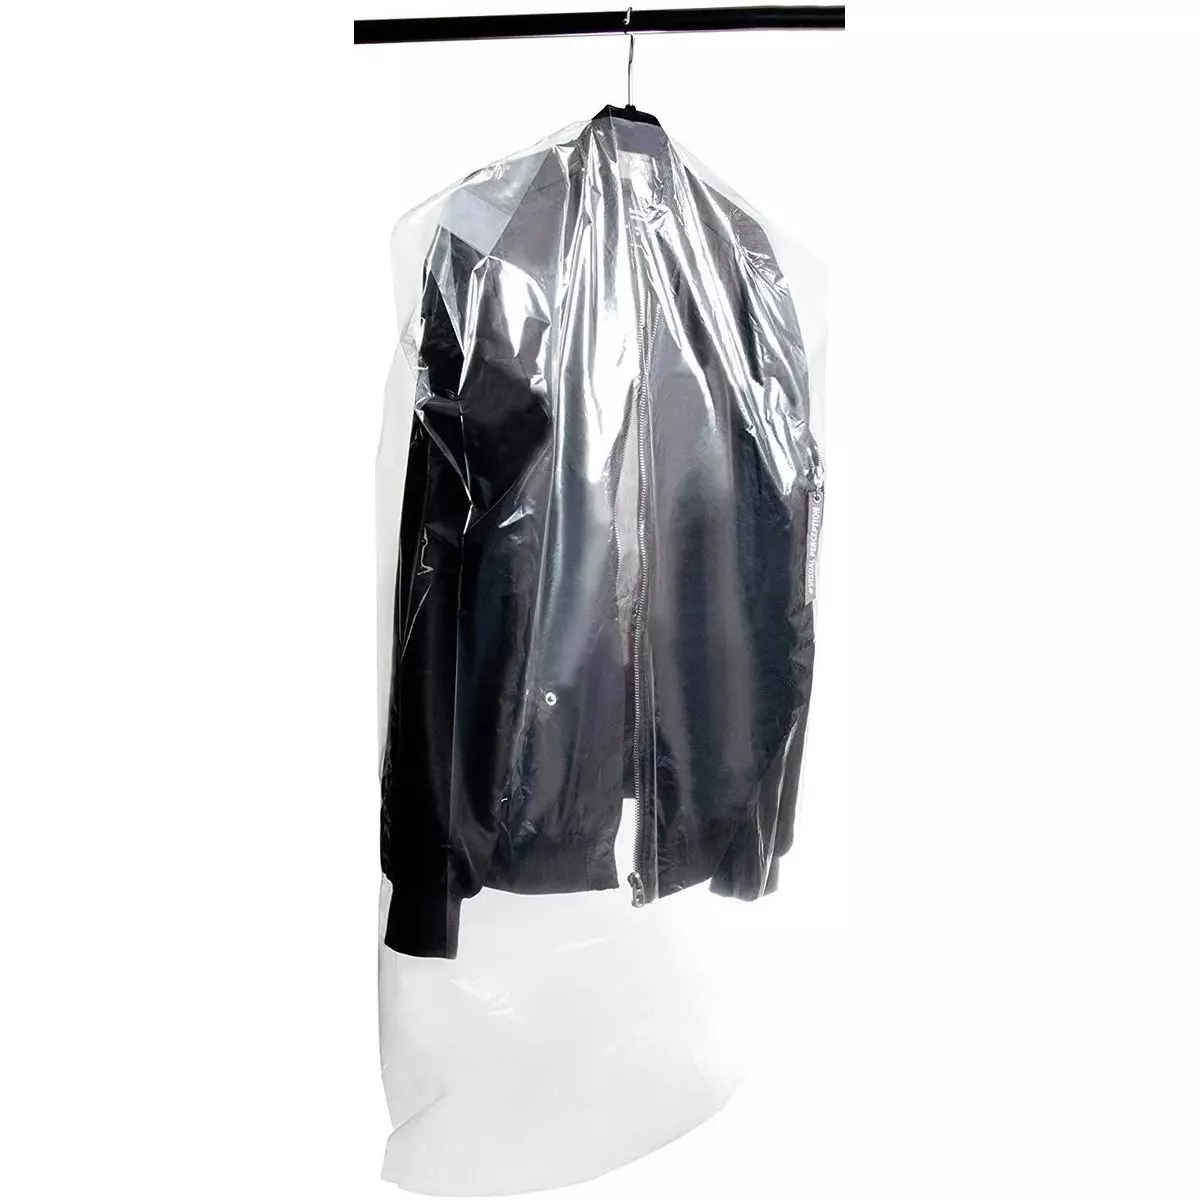 Dry Cleaning Bags - Garment Bags - Clear Plastic Clothes Bags on a Roll -  Wedding Dress Bags